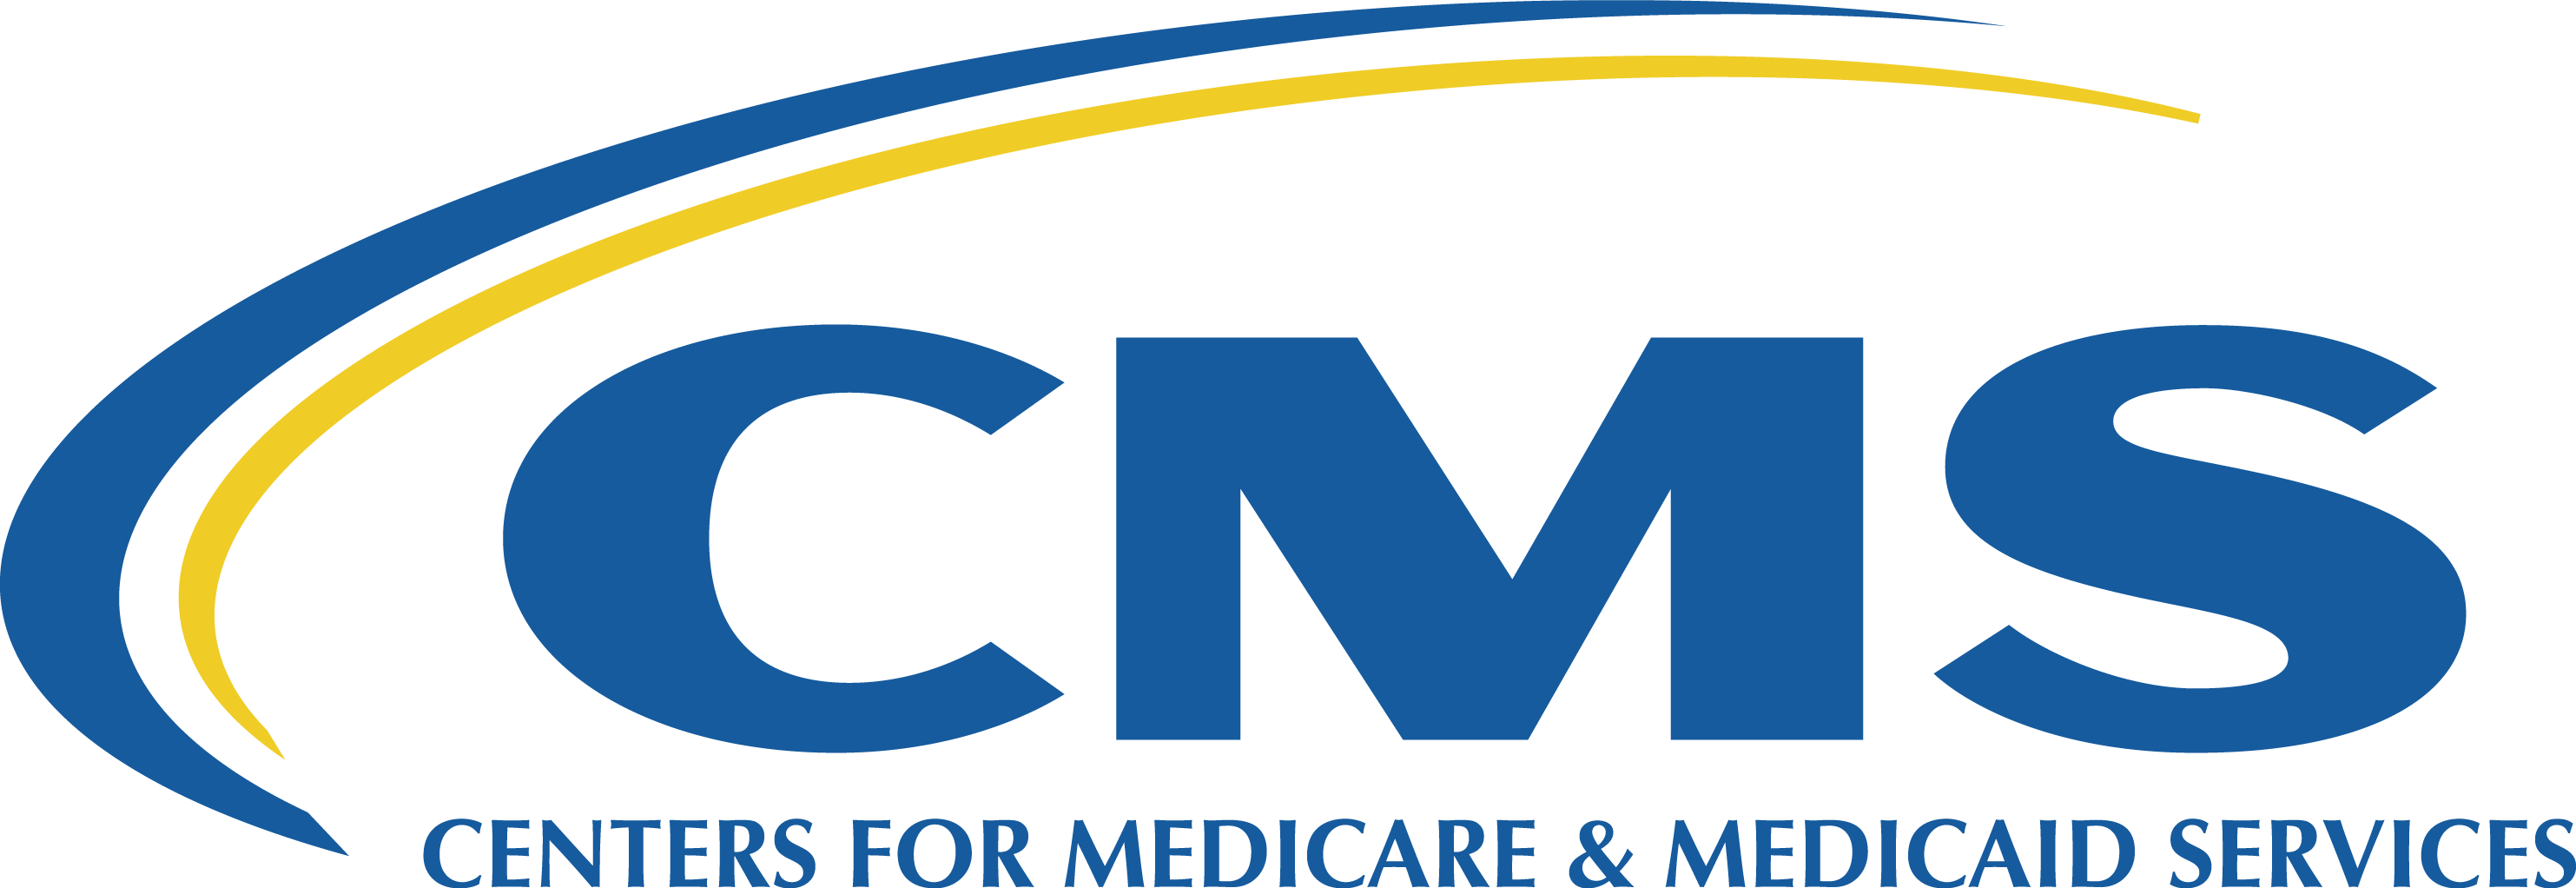 CMS Logo   Centers for Medicare and Medicaid Services png